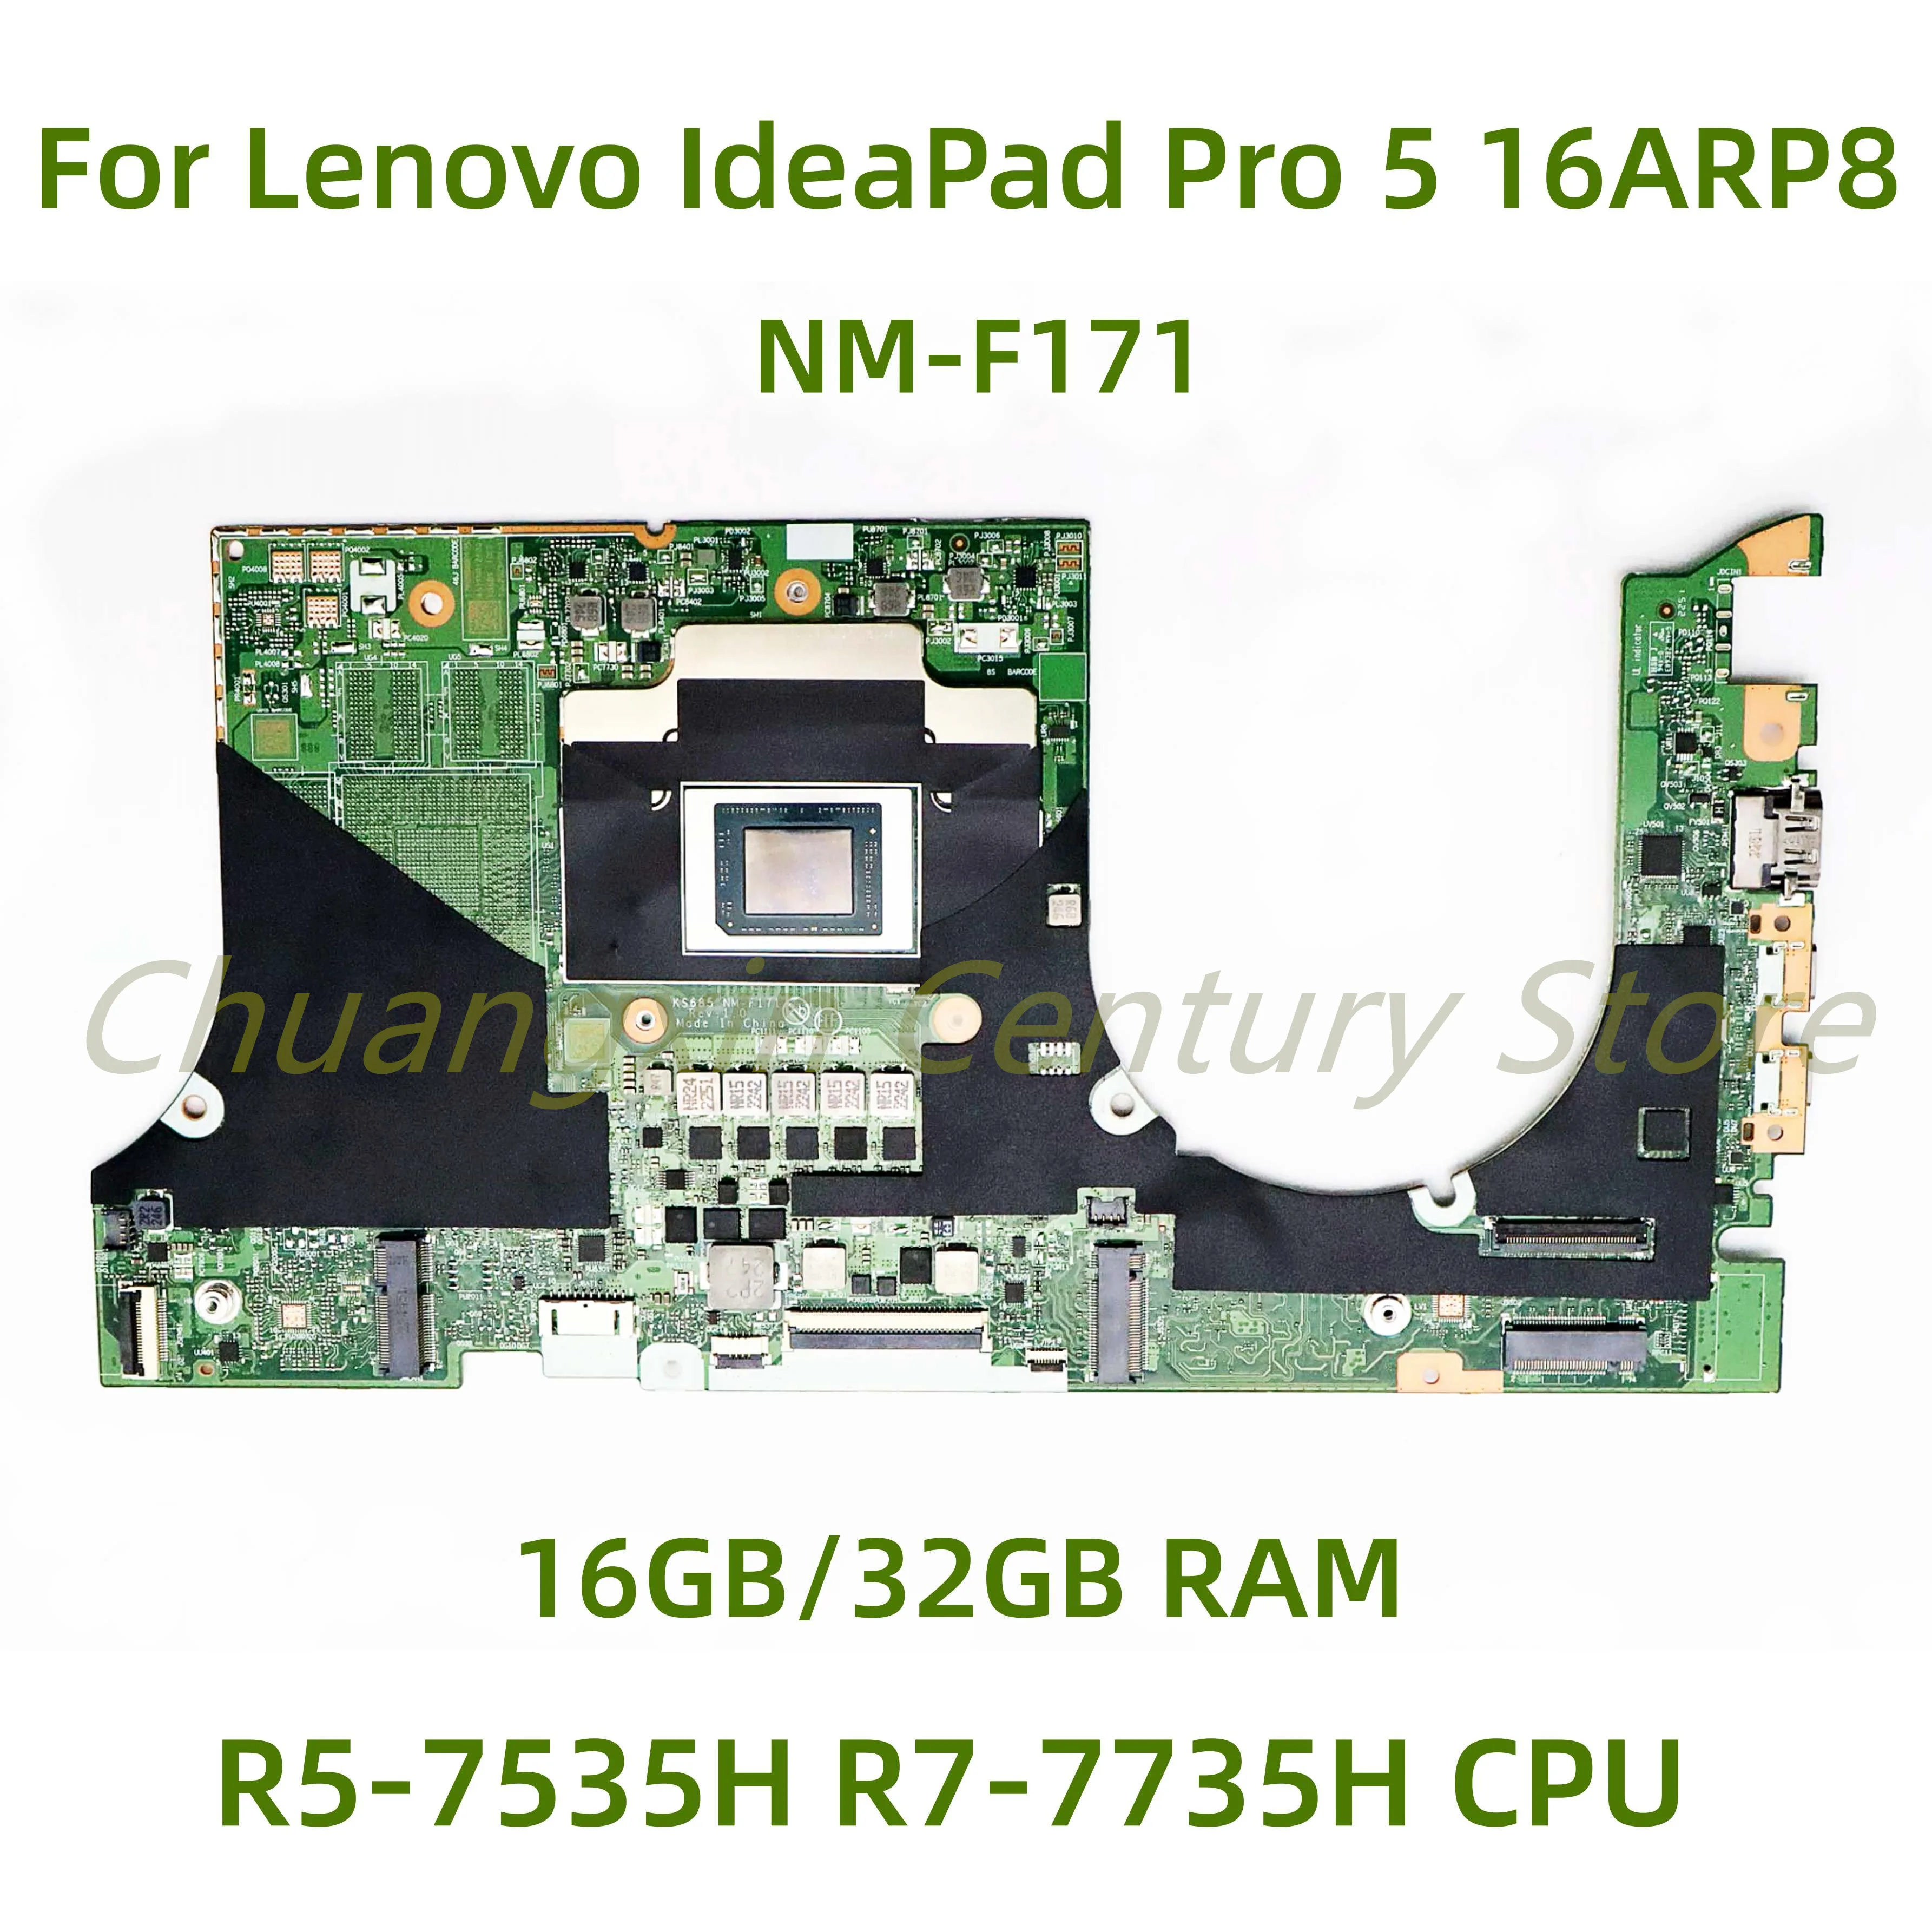 

Suitable for Lenovo IdeaPad Pro 5 16ARP8 laptop motherboard NM-F171 with R5-7535H R7-7735H CPU 16GB/32GB RAM 100% Tested Fully